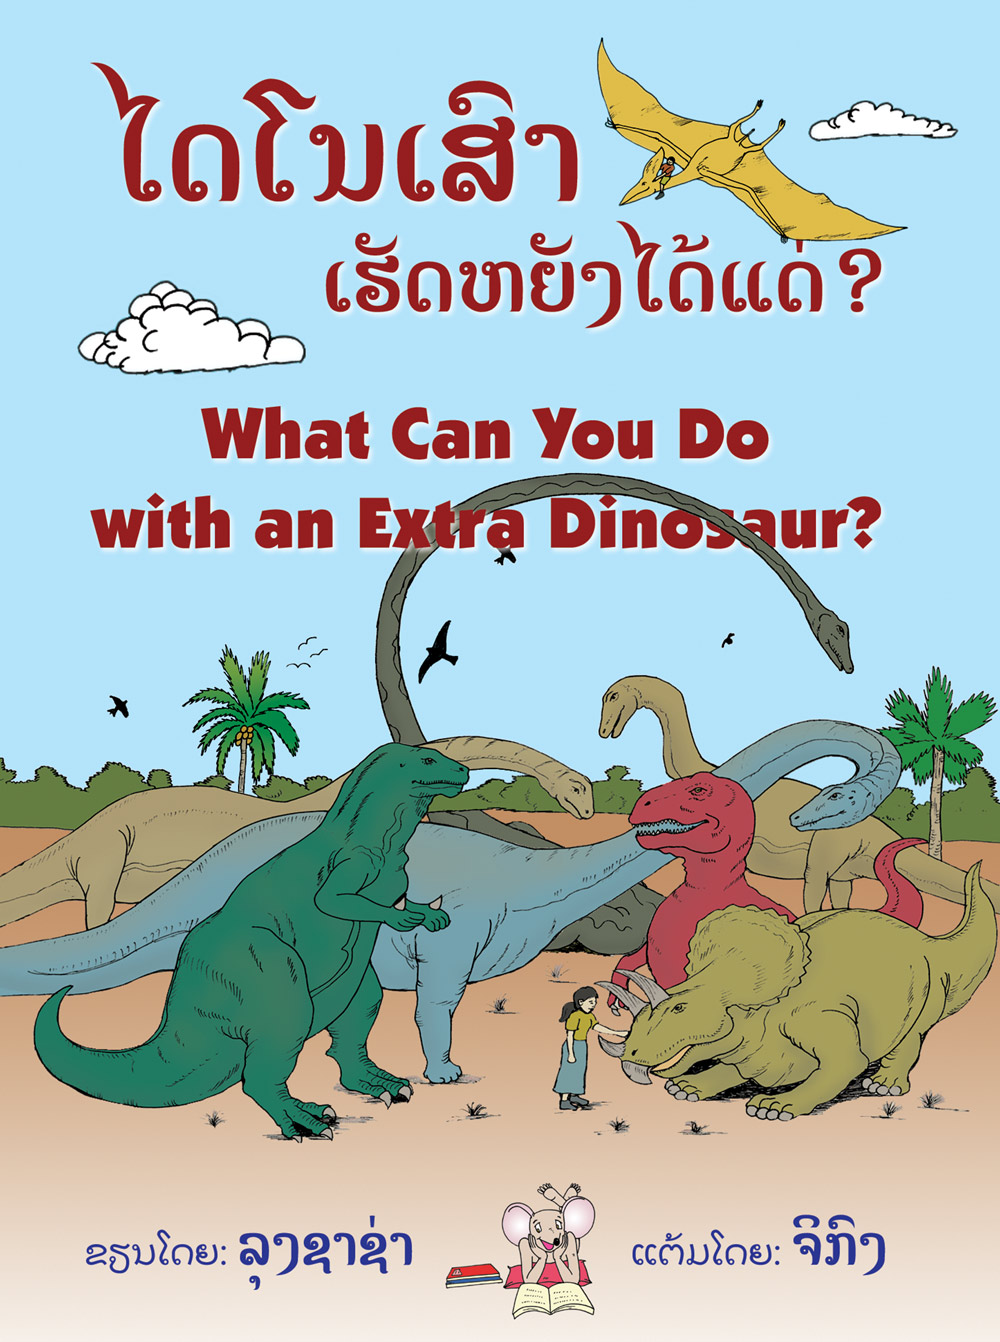 What Can You Do with an Extra Dinosaur? large book cover, published in Lao and English